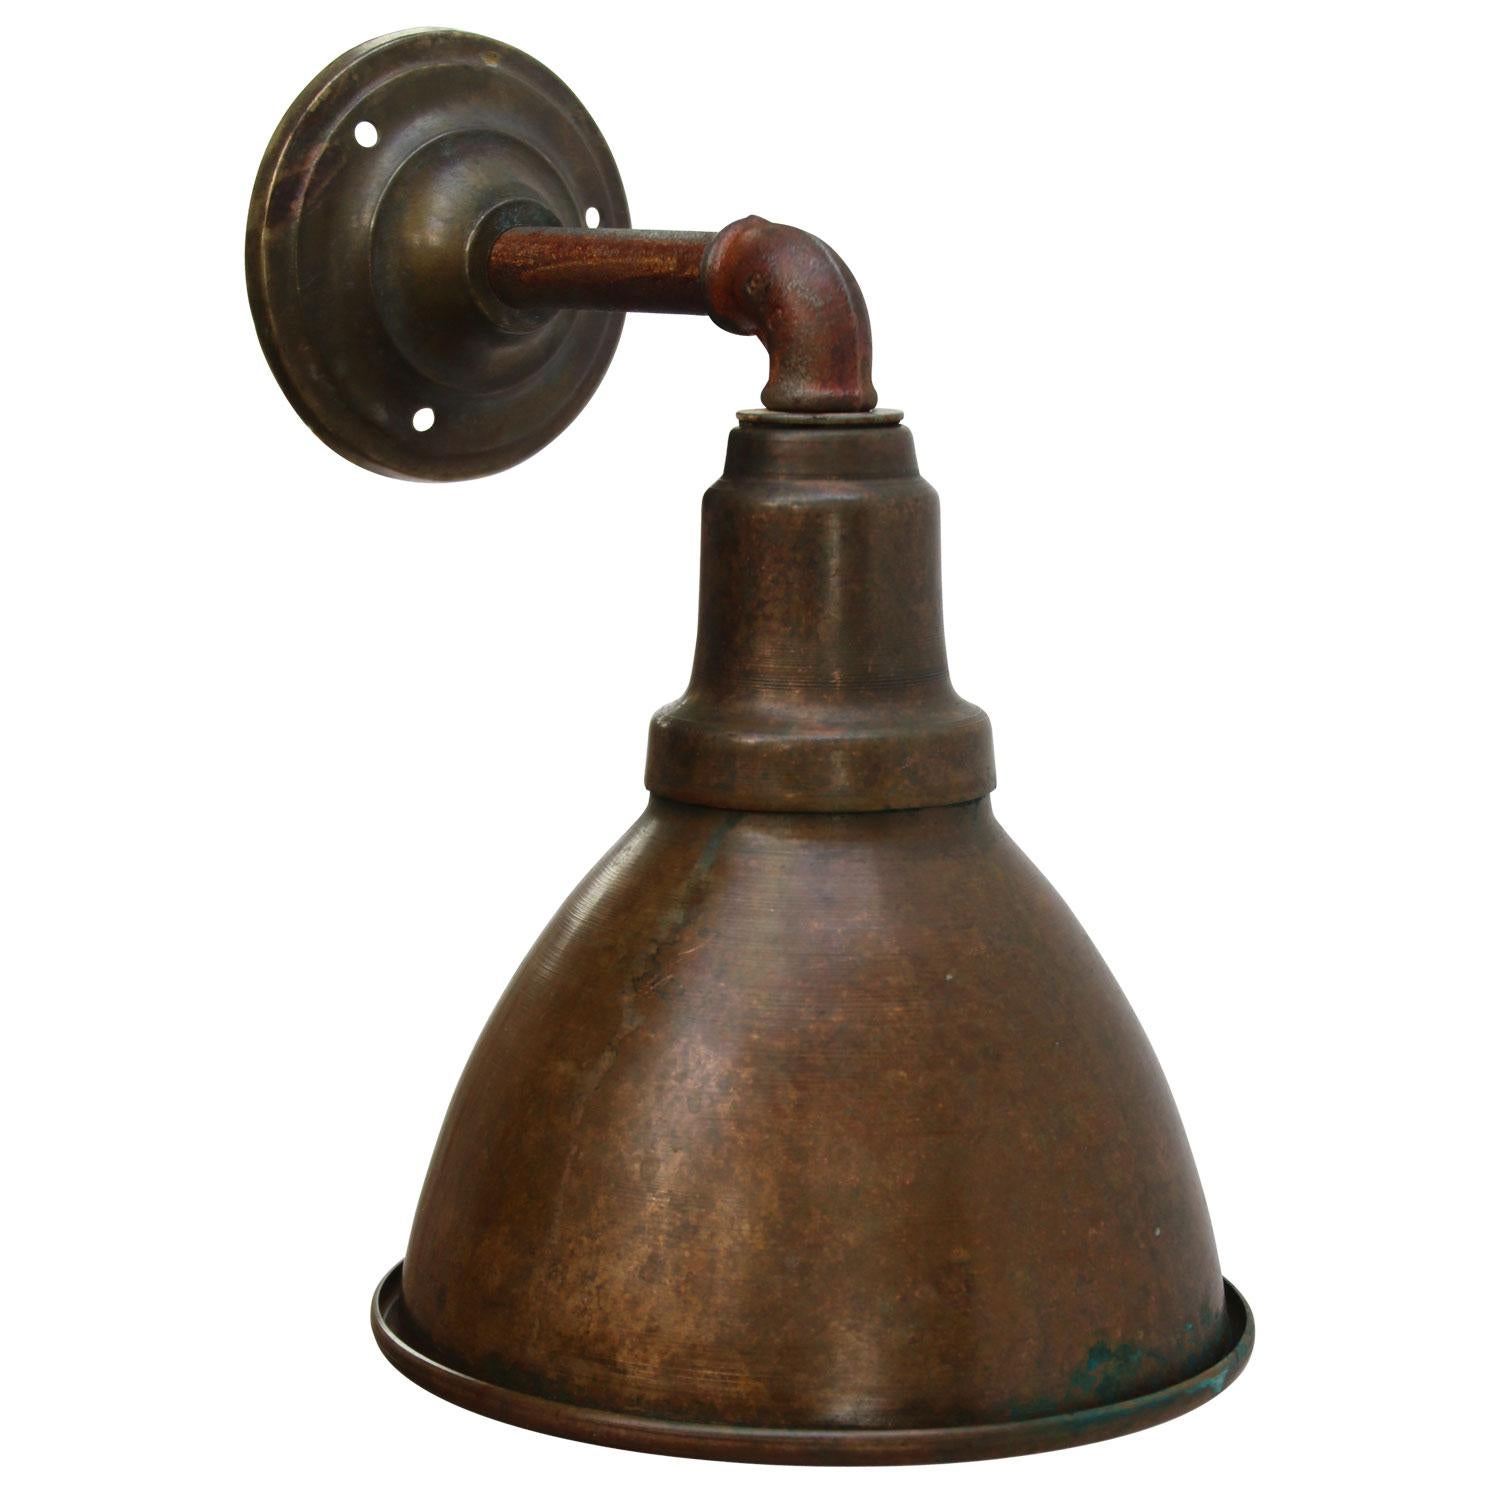 Industrial wall light made of copper, cast iron arm with brass wall plate.

Diameter cast iron wall piece: 10 cm, 3 holes to secure

Weight: 1.80 kg / 4 lb

Priced per individual item. All lamps have been made suitable by international